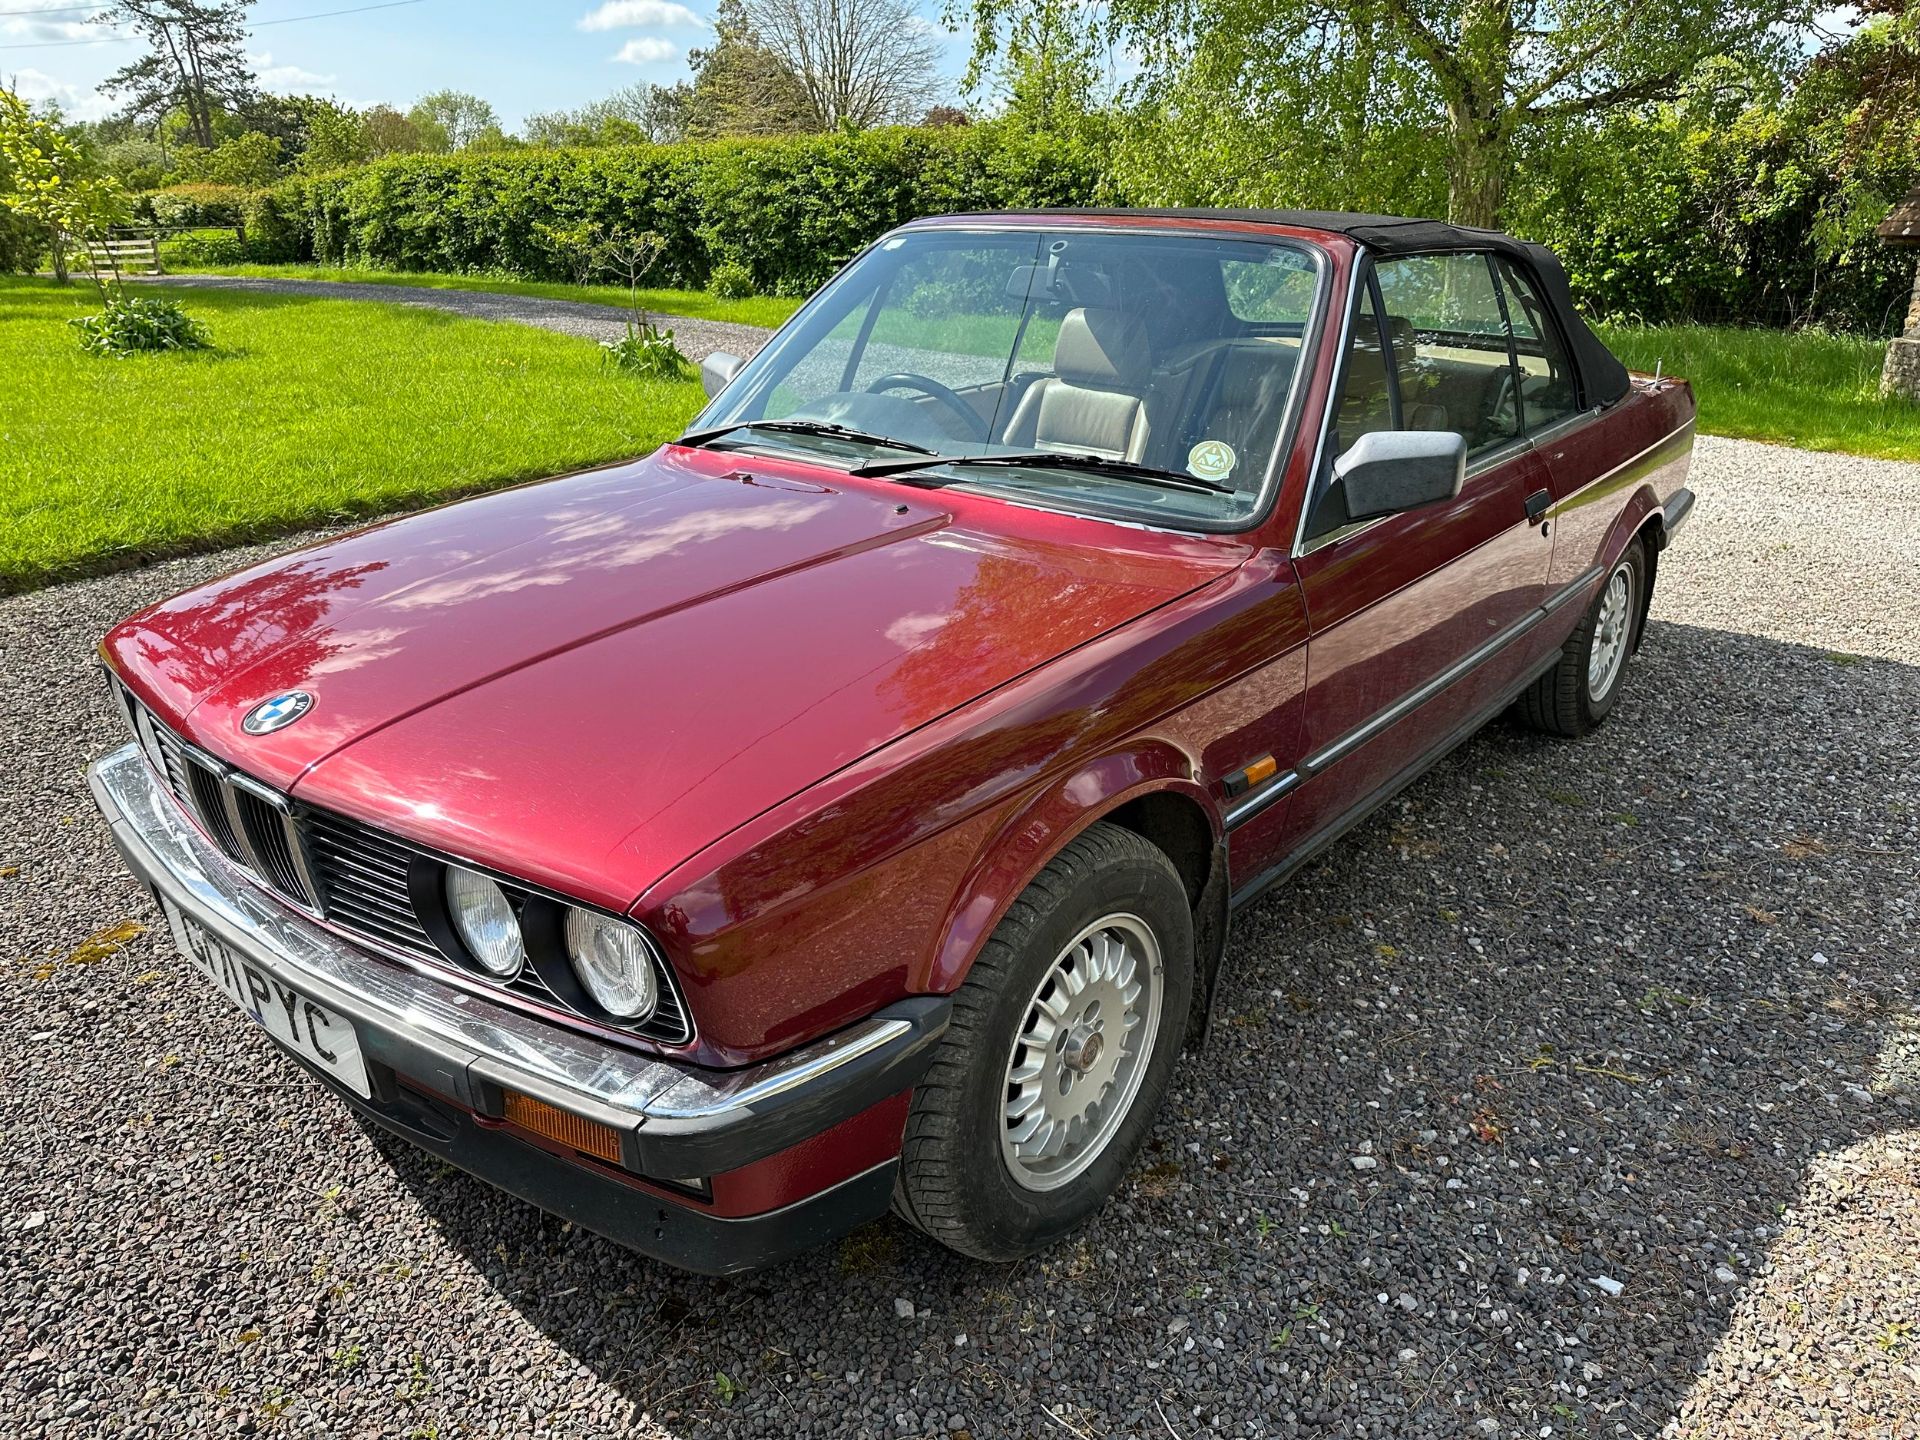 1990 BMW 325i Convertible Registration number G171 PYC Chassis number WBABB12070LB95832 Engine